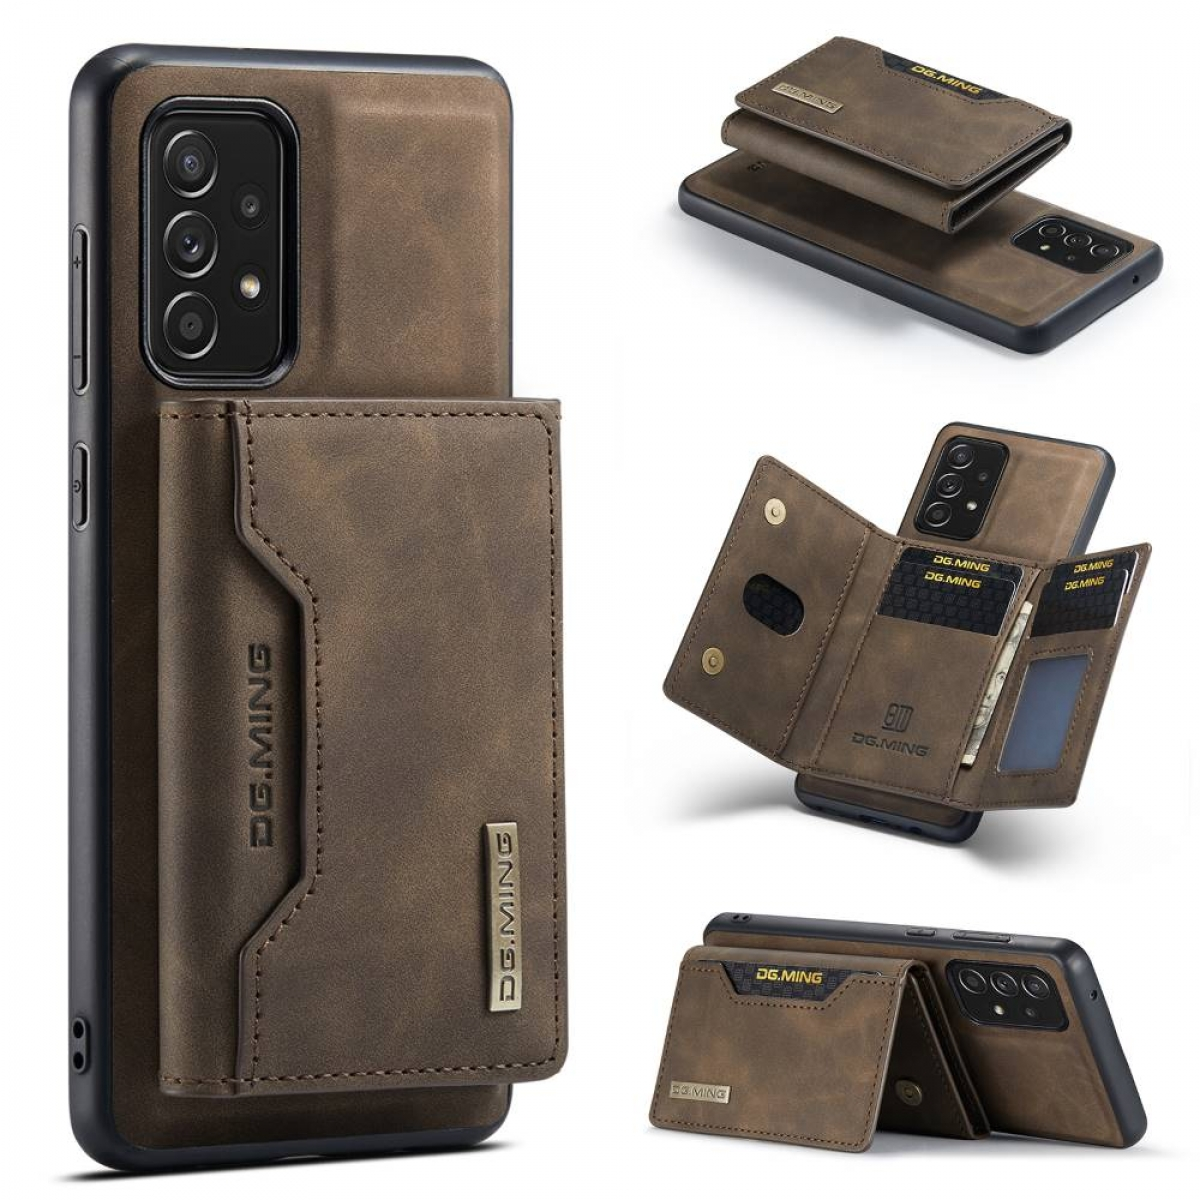 DG MING Galaxy Samsung, 5G, Backcover, Coffee 2in1, M2 A52